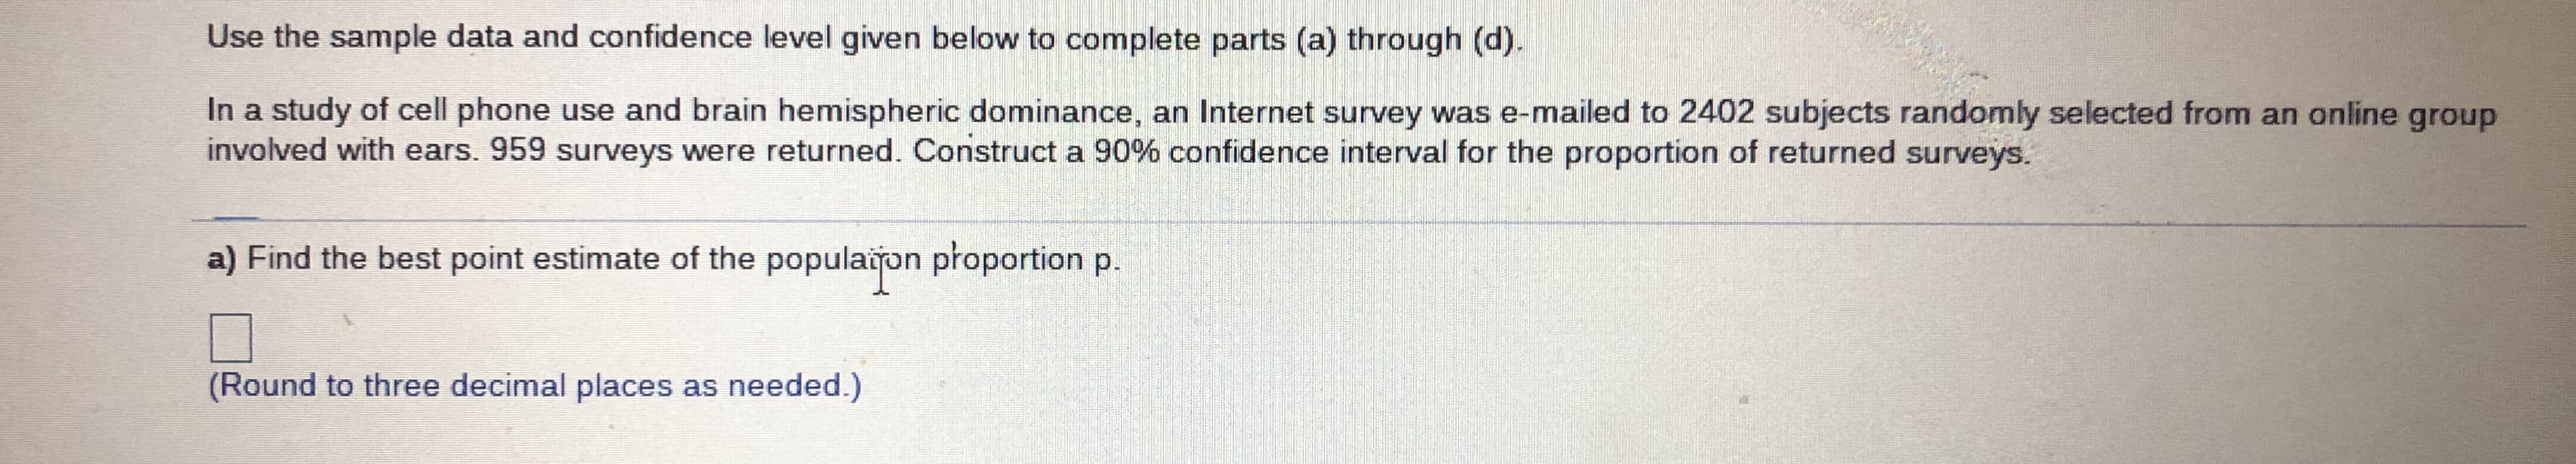 Use the sample data and confidence level given below to complete parts (a) through (d).
In a study of cell phone use and brain hemispheric dominance, an Internet survey was e-mailed to 2402 subjects randomly selected from an online group
involved with ears. 959 surveys were returned. Construct a 90% confidence interval for the proportion of returned surveys.
a) Find the best point estimate of the populaion płoportion p.
(Round to three decimal places as needed.)
